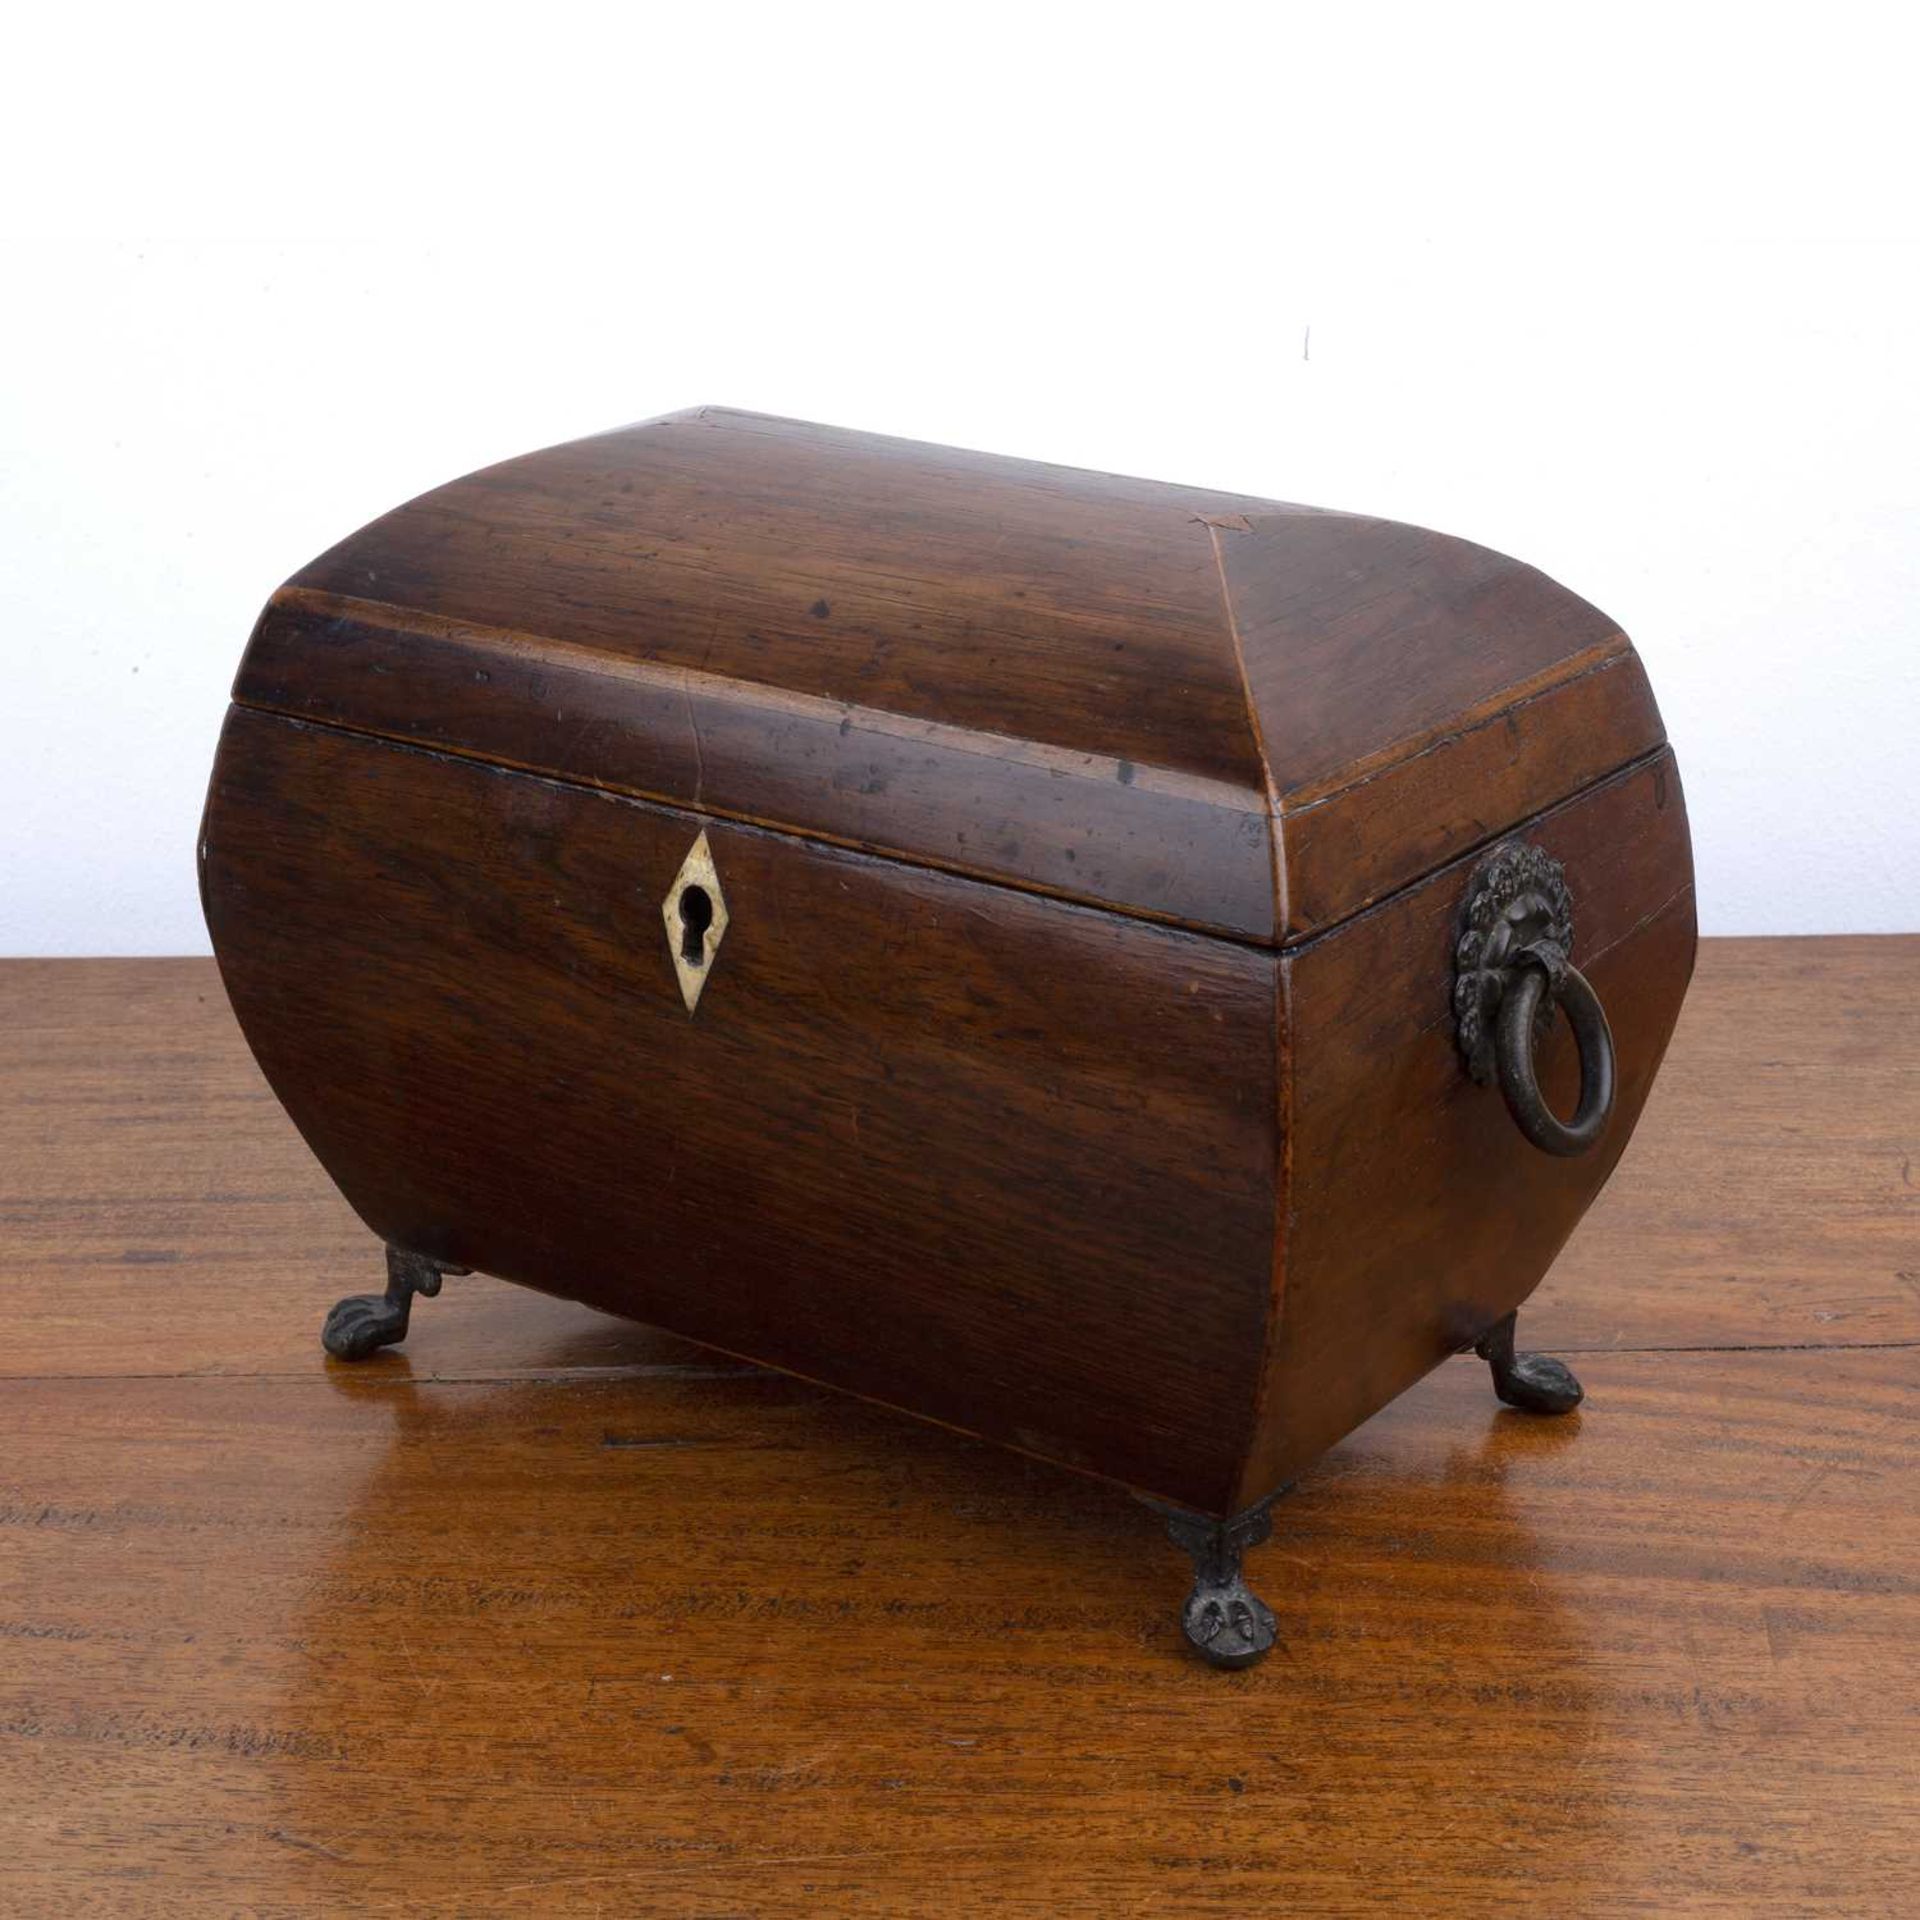 Rosewood and marquetry tea caddy 19th Century, with brass ring handles, standing on brass pad feet - Image 3 of 7